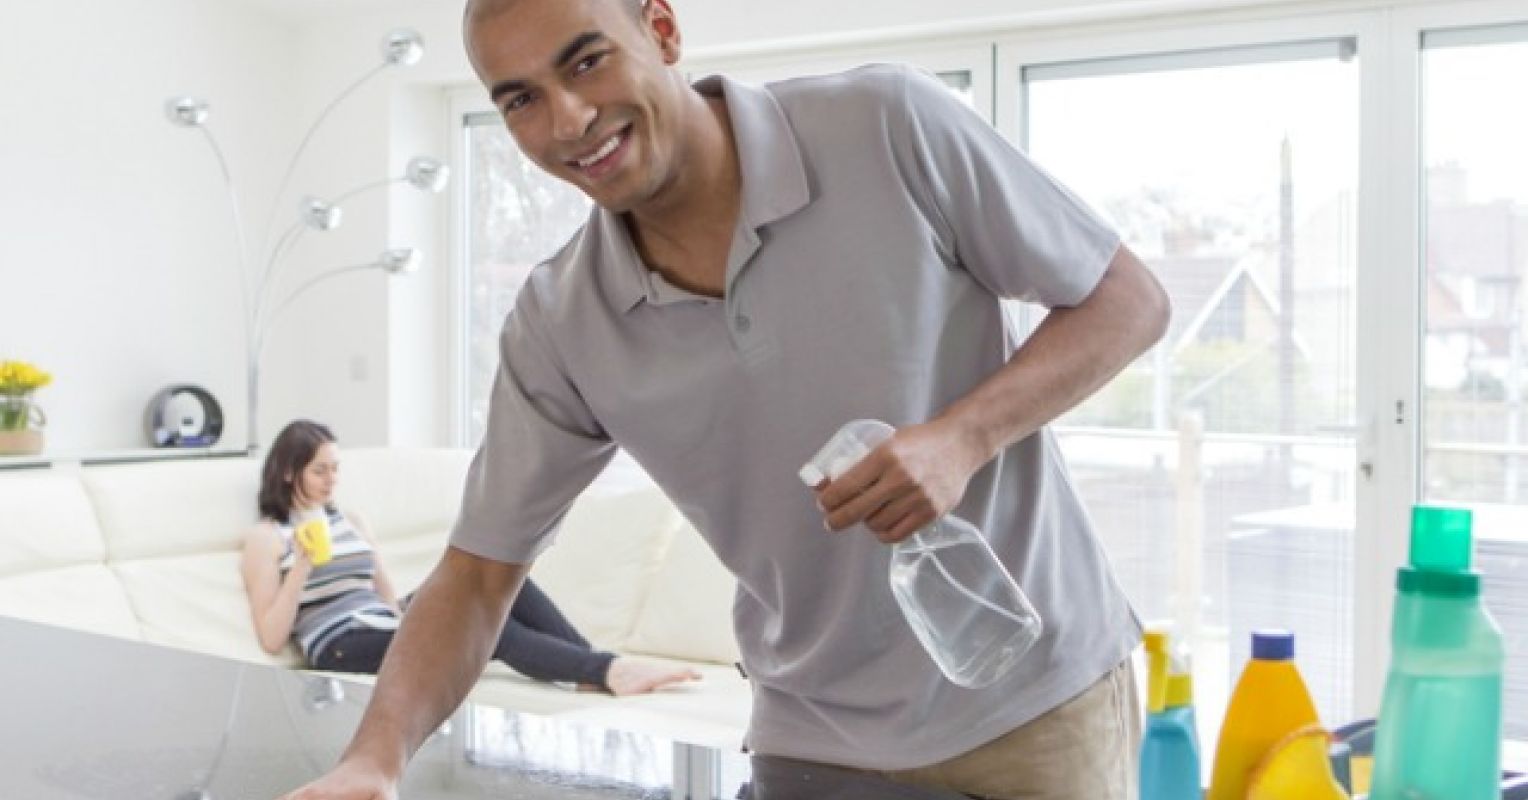 The Powerful Psychology Behind Cleanliness | Psychology Today